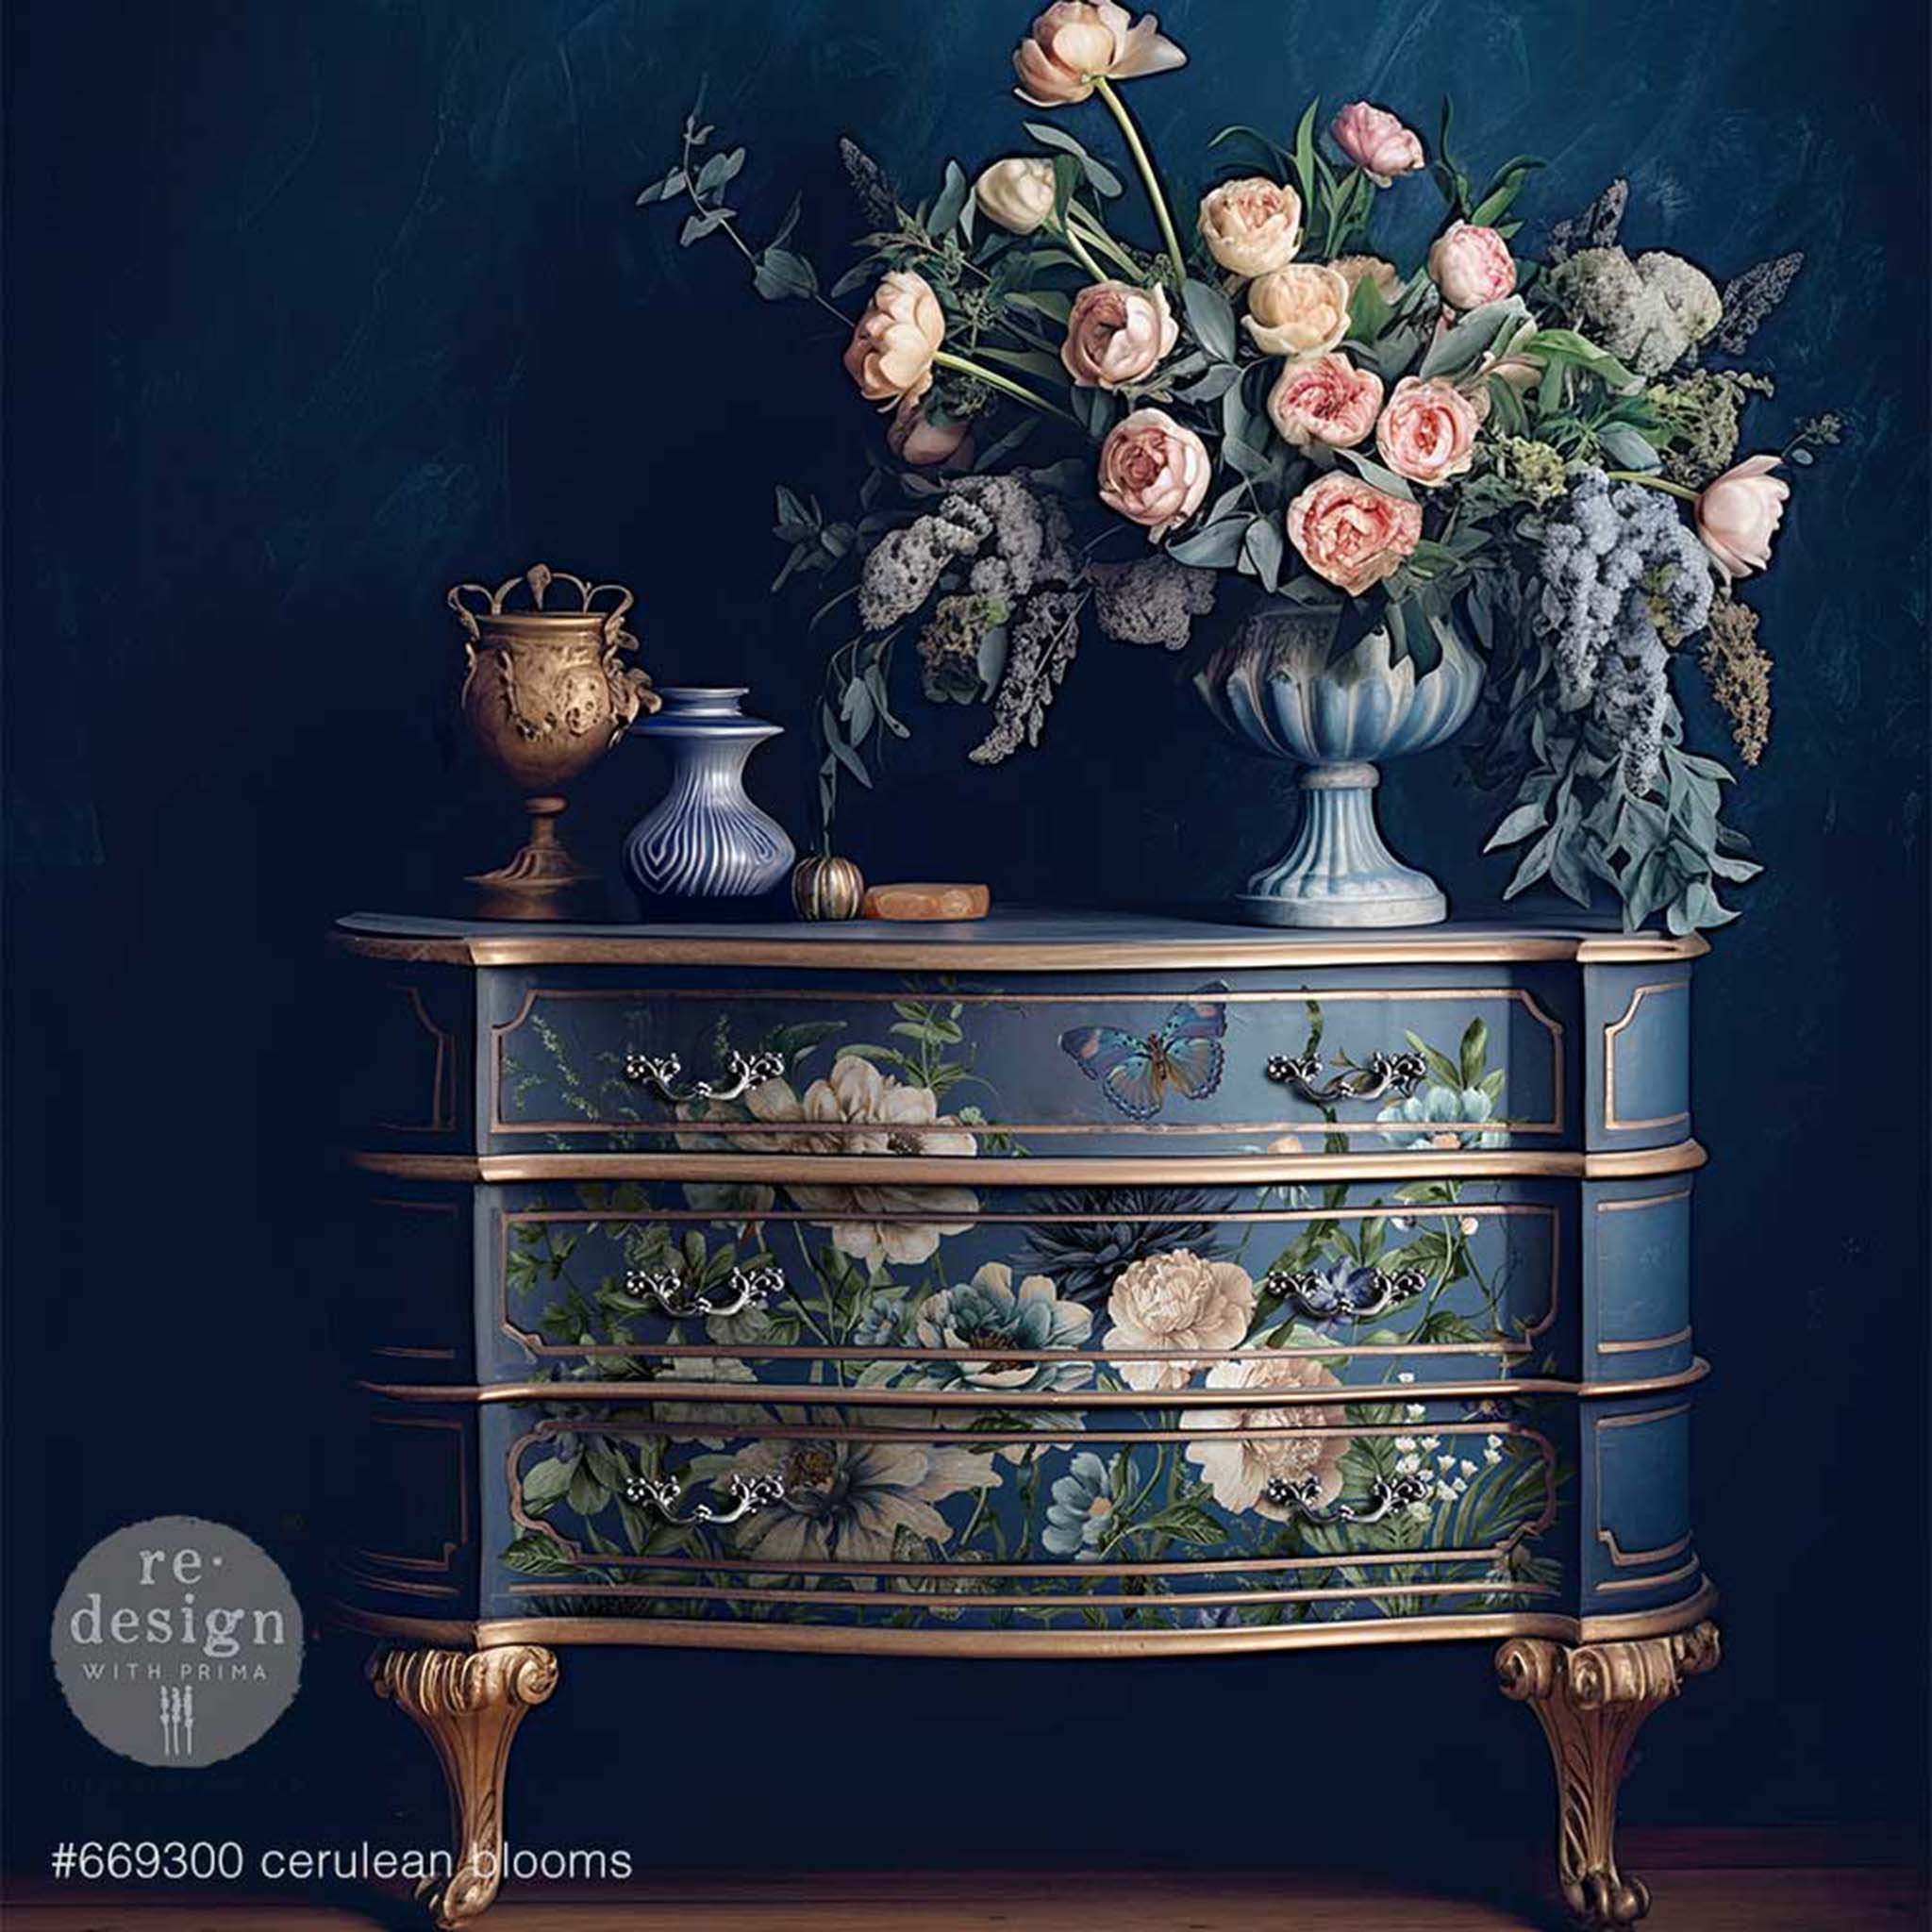 A vintage 3-drawer dresser is painted blue with gold accents and features ReDesign with Prima's Cerulean Blooms rub-on transfer on the drawers.